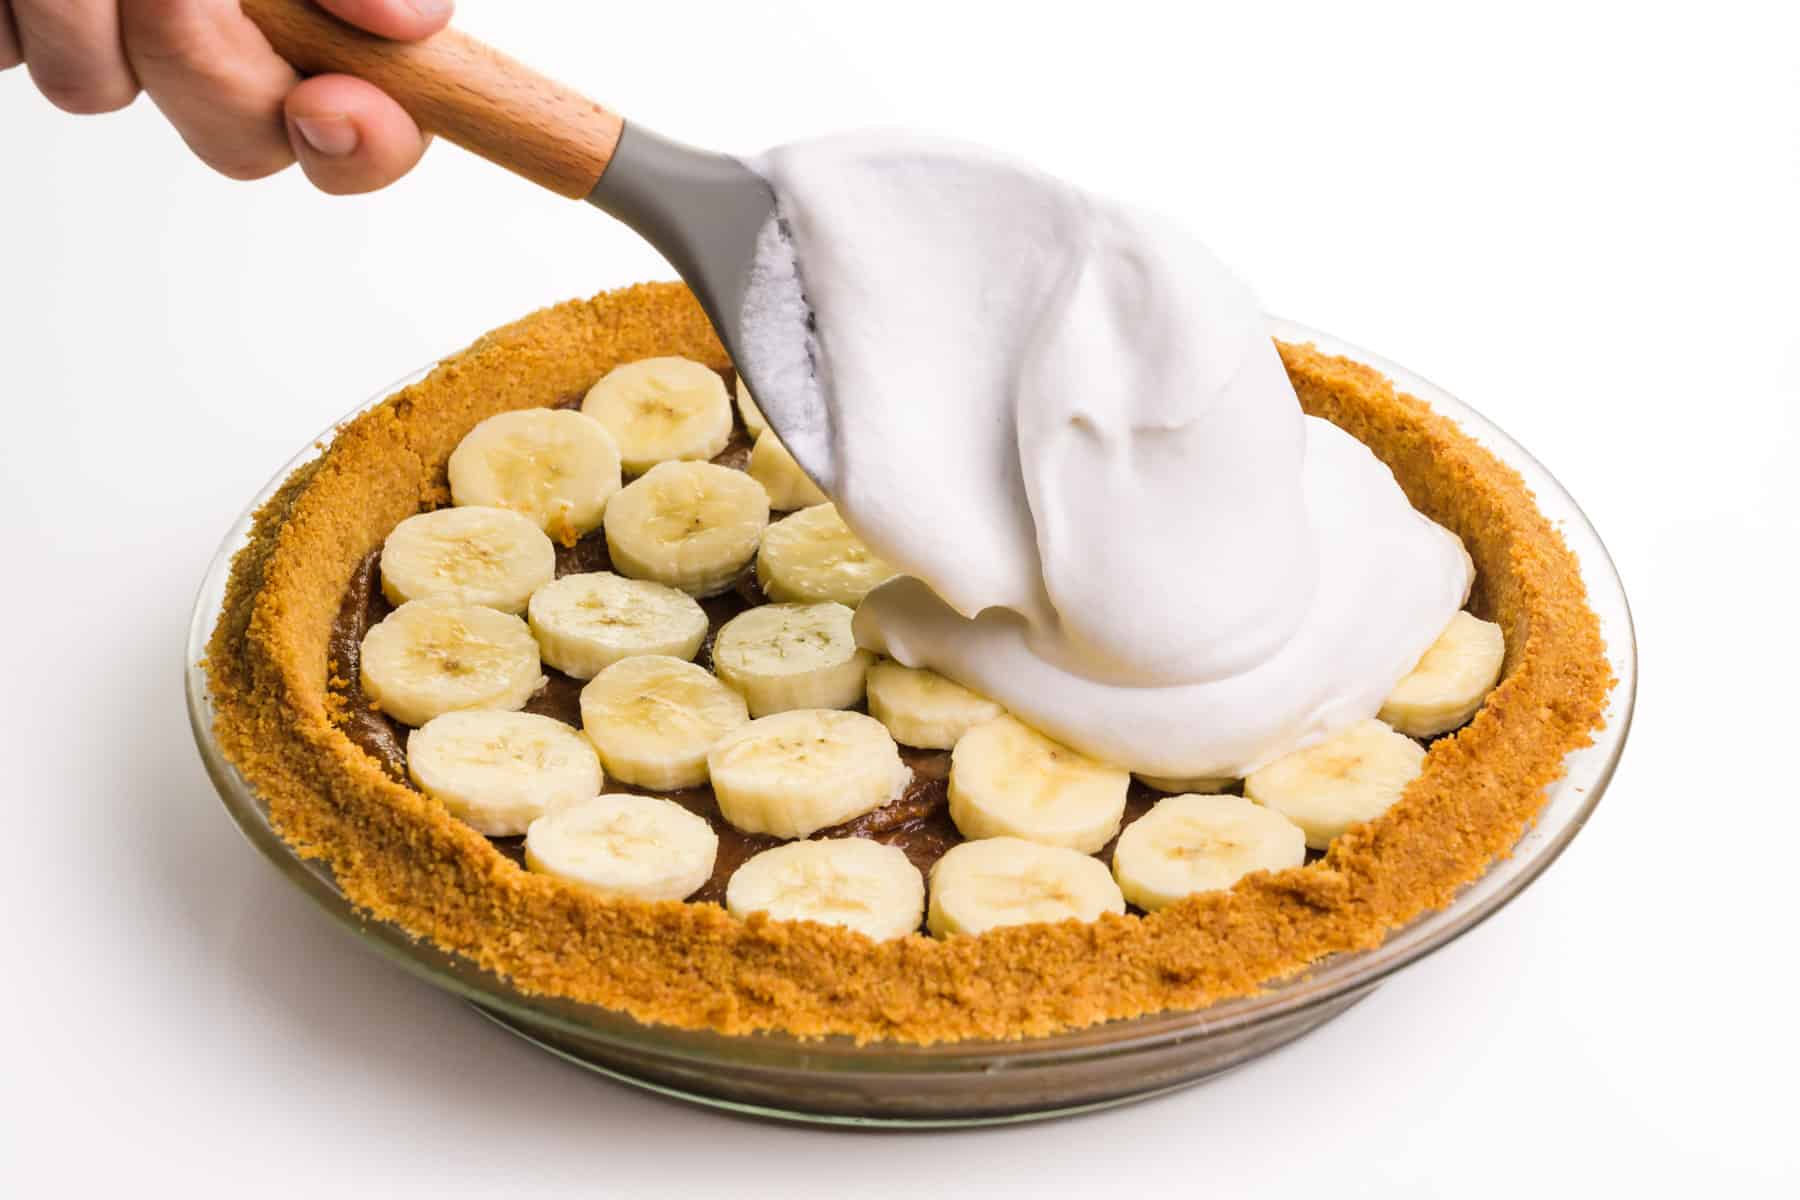 Whipped cream is being spooned over a pie with sliced bananas.